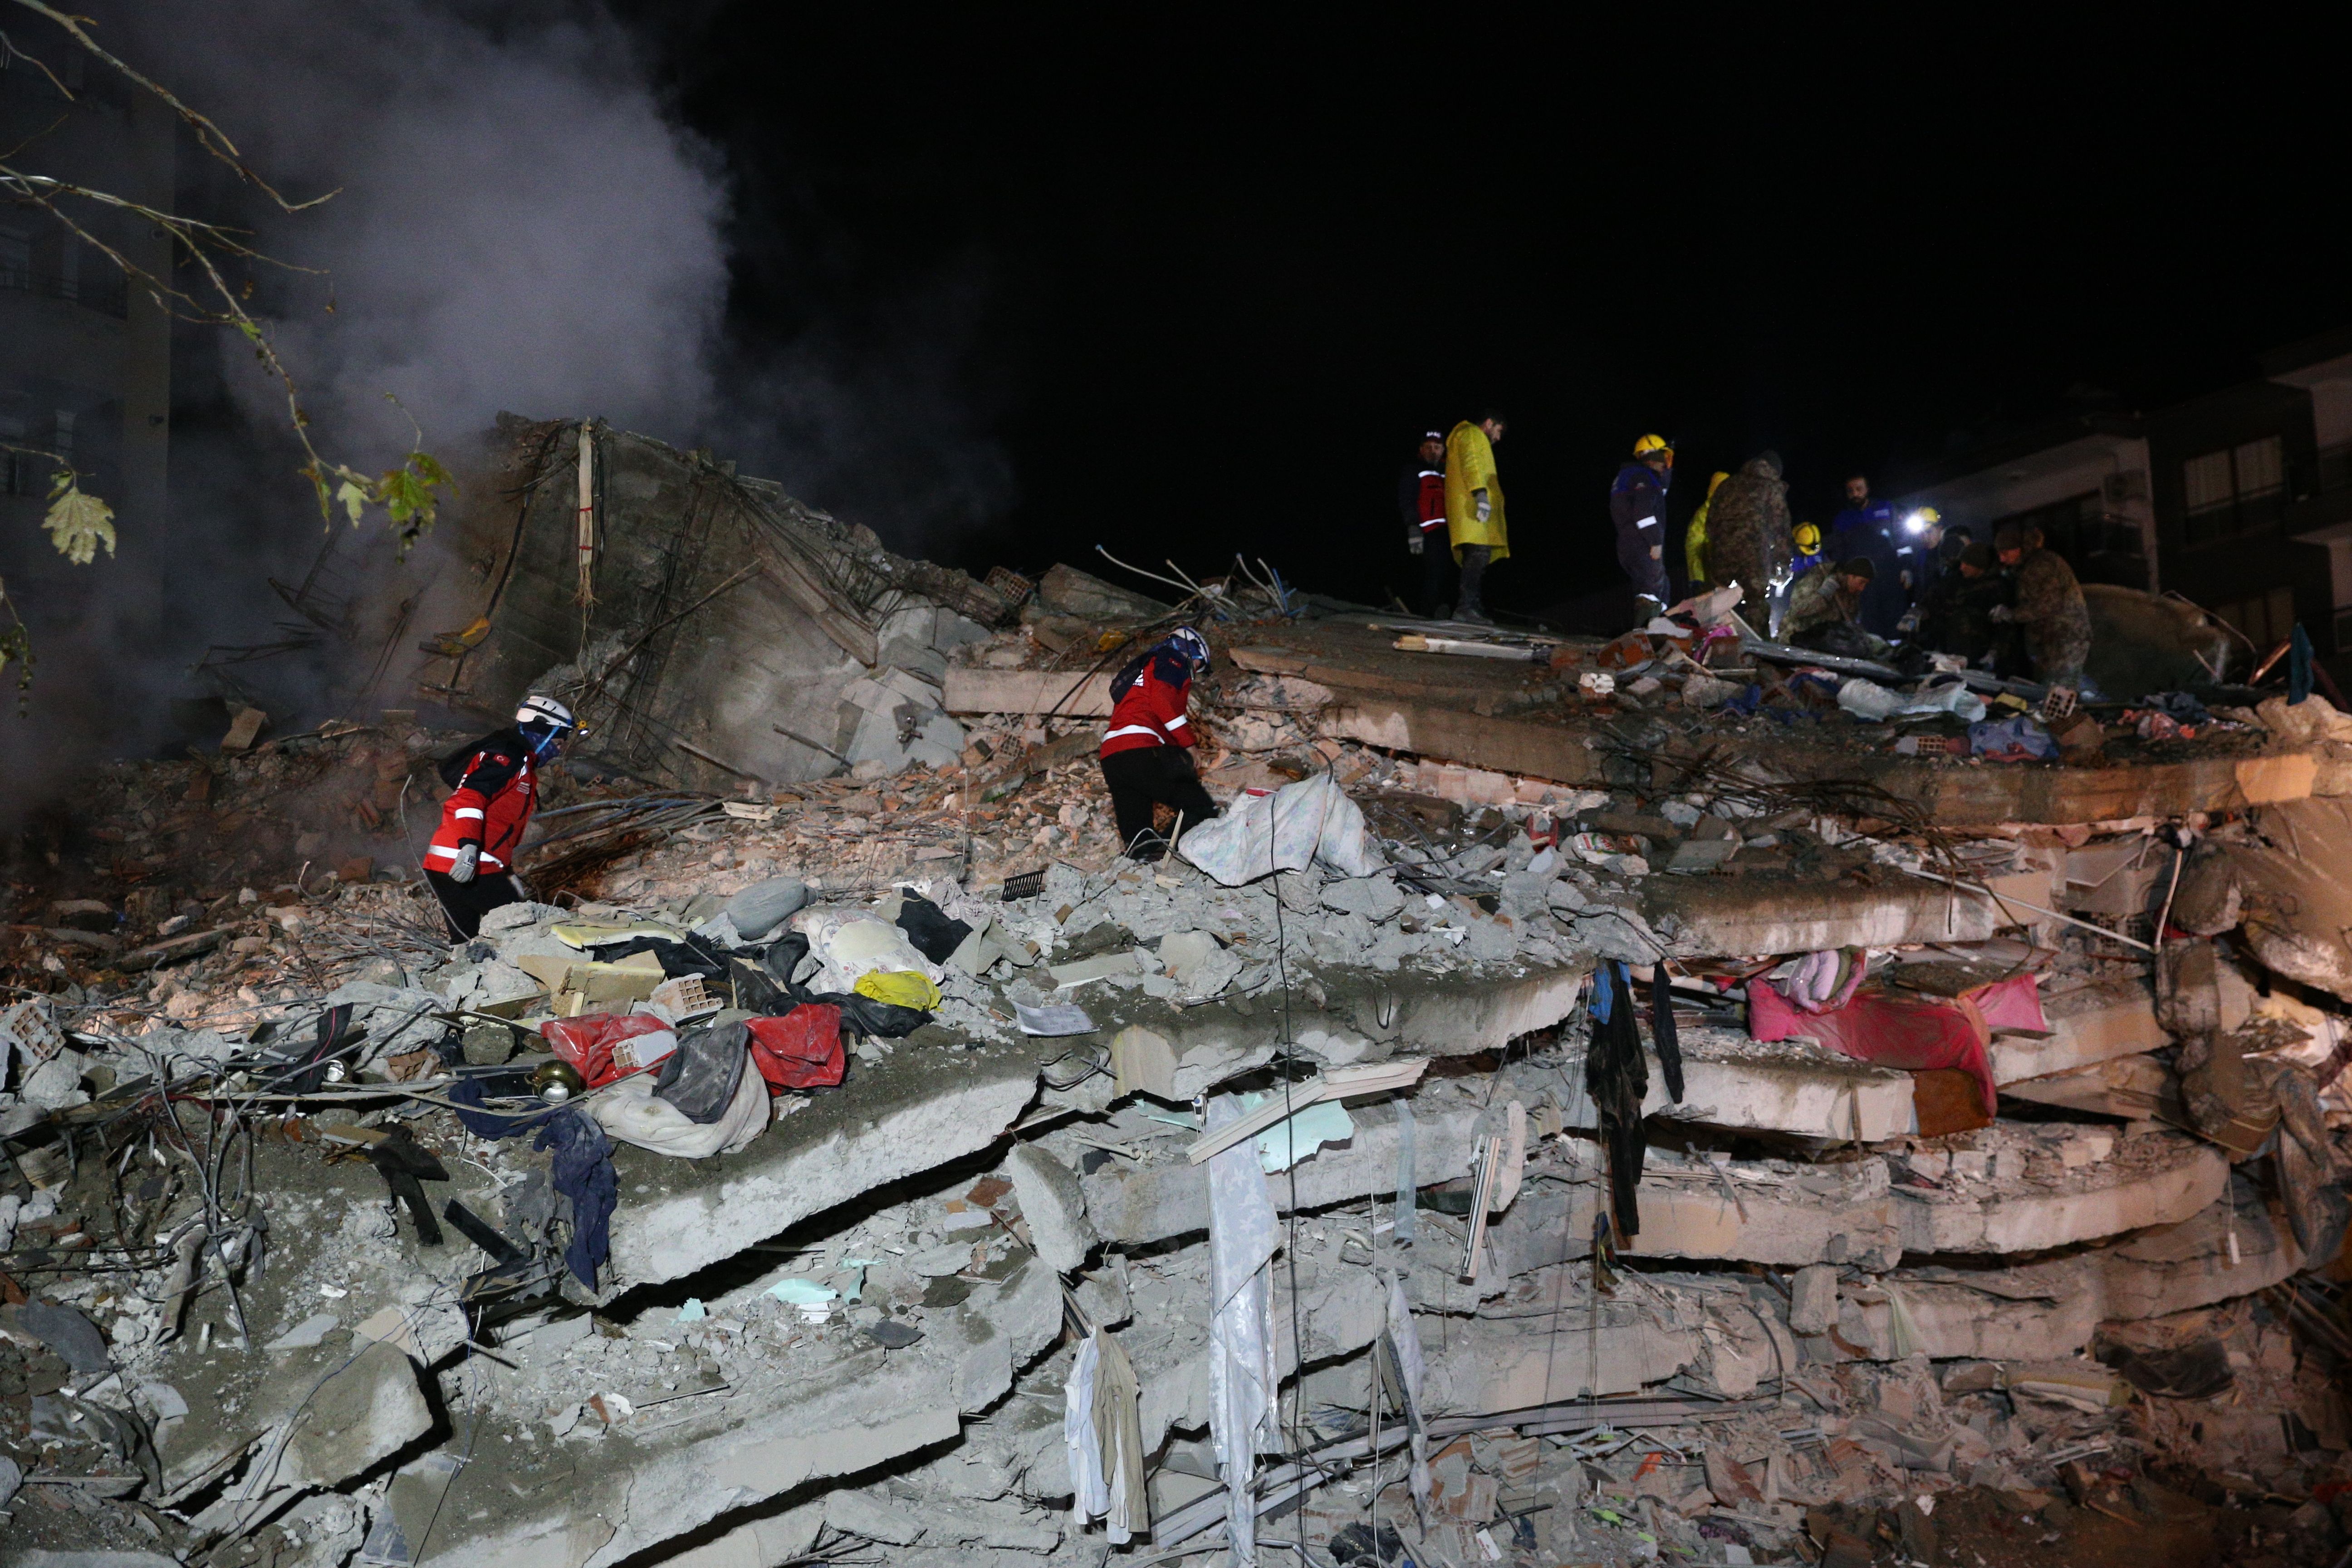  Search and rescue operations continue around the wreckage, in Osmaniye, Turkey on February 7, following the quake.